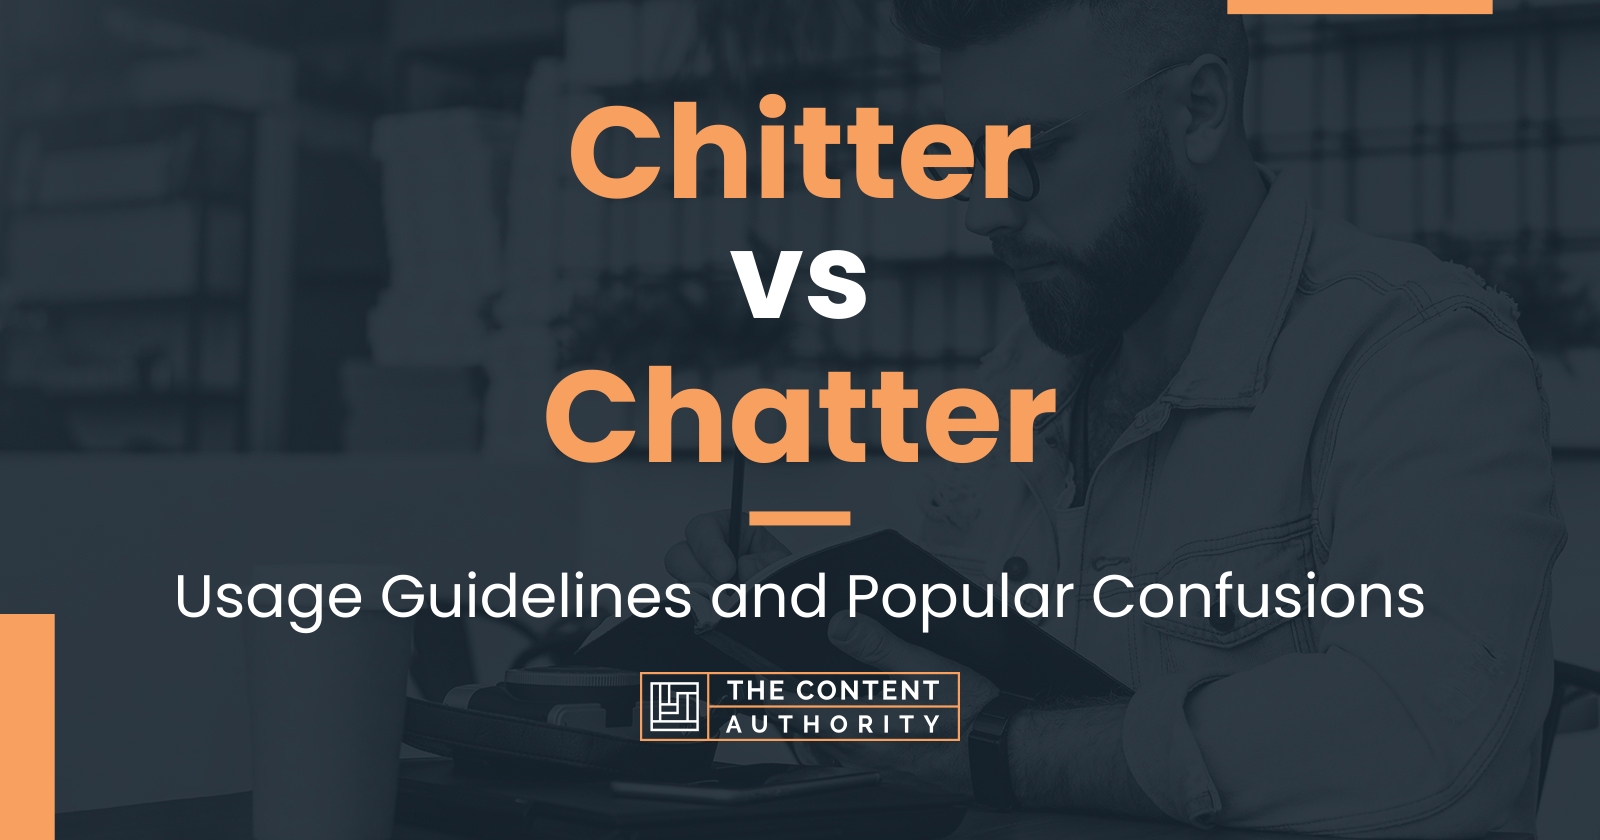 Chitter vs Chatter: Usage Guidelines and Popular Confusions